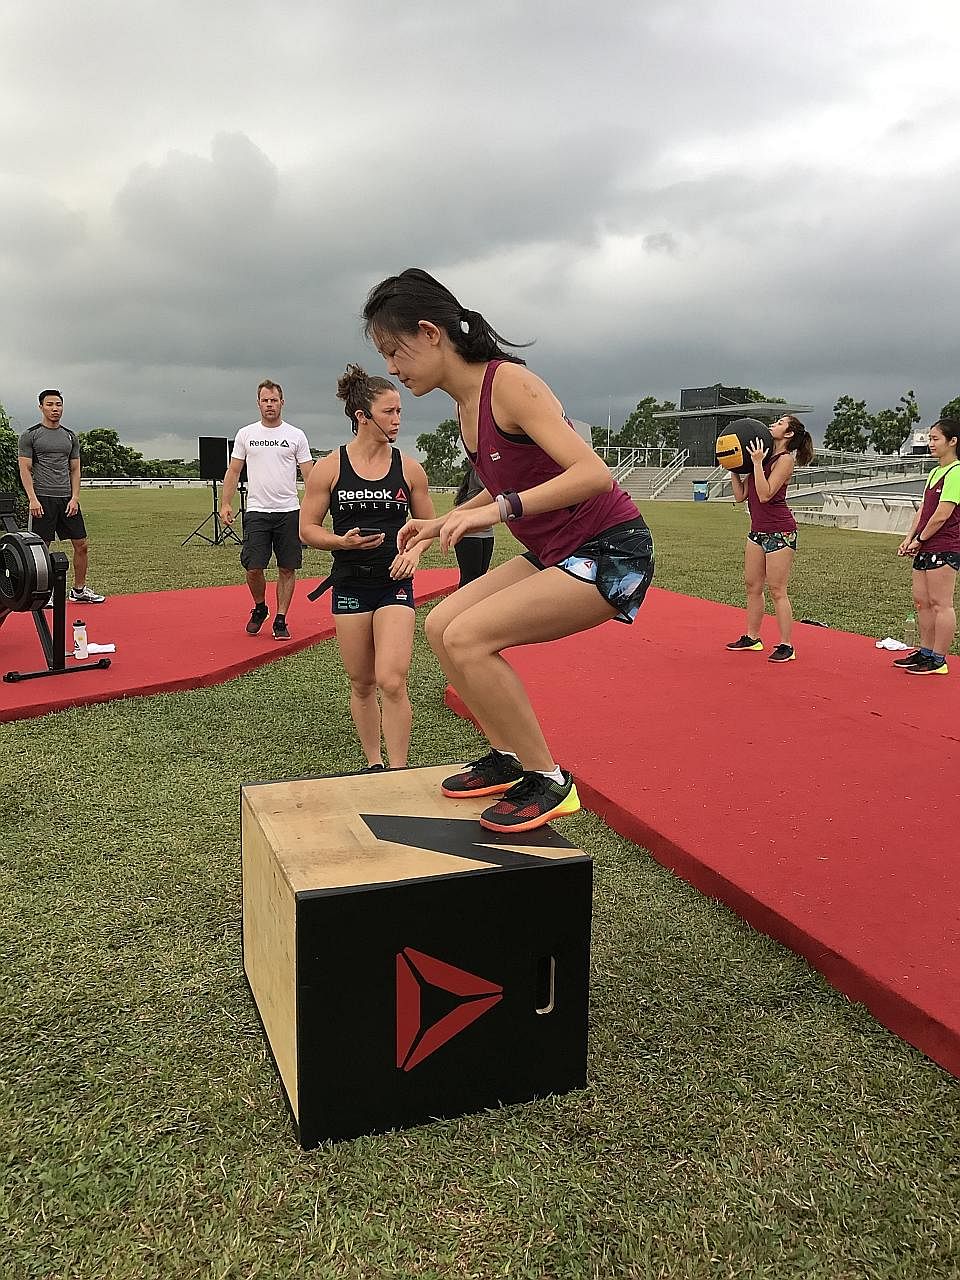 Writer Estelle Low tries out the various CrossFit routines. Because of the emphasis on versatility, even newcomers can tailor their approach to those activities that they find most interesting.